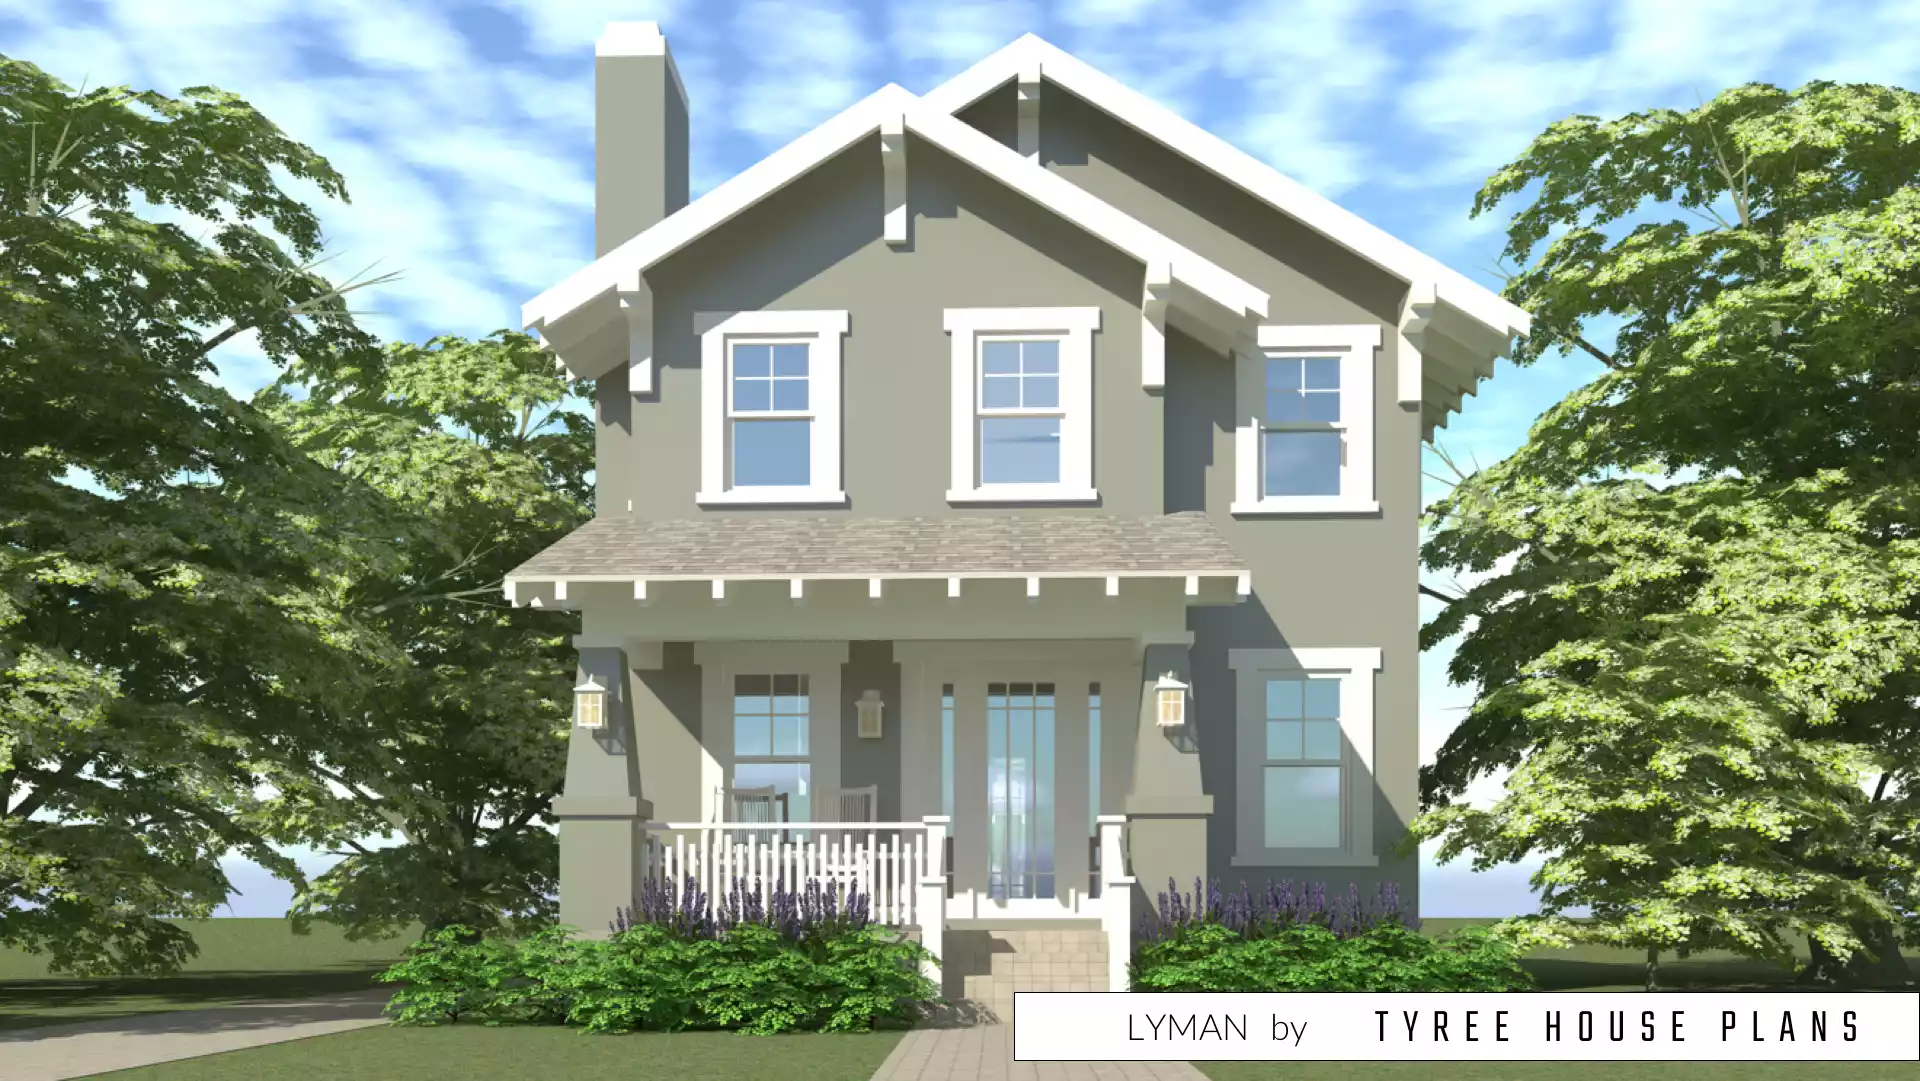 Front view. Lyman by Tyree House Plans.